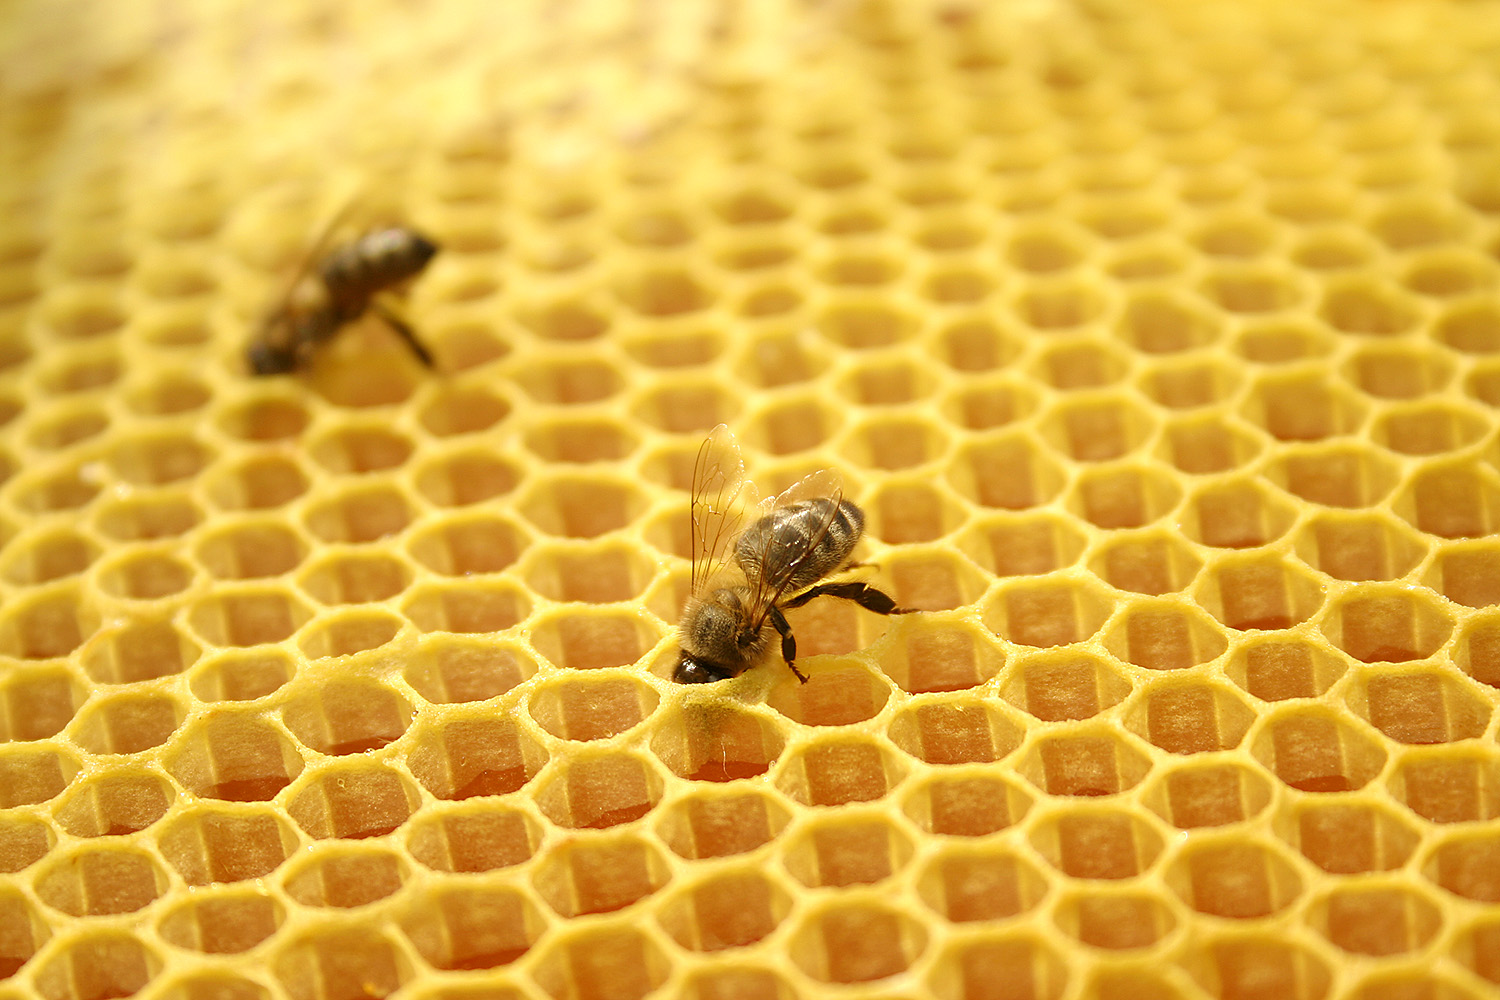 two beekeepers work on a large honeycomb